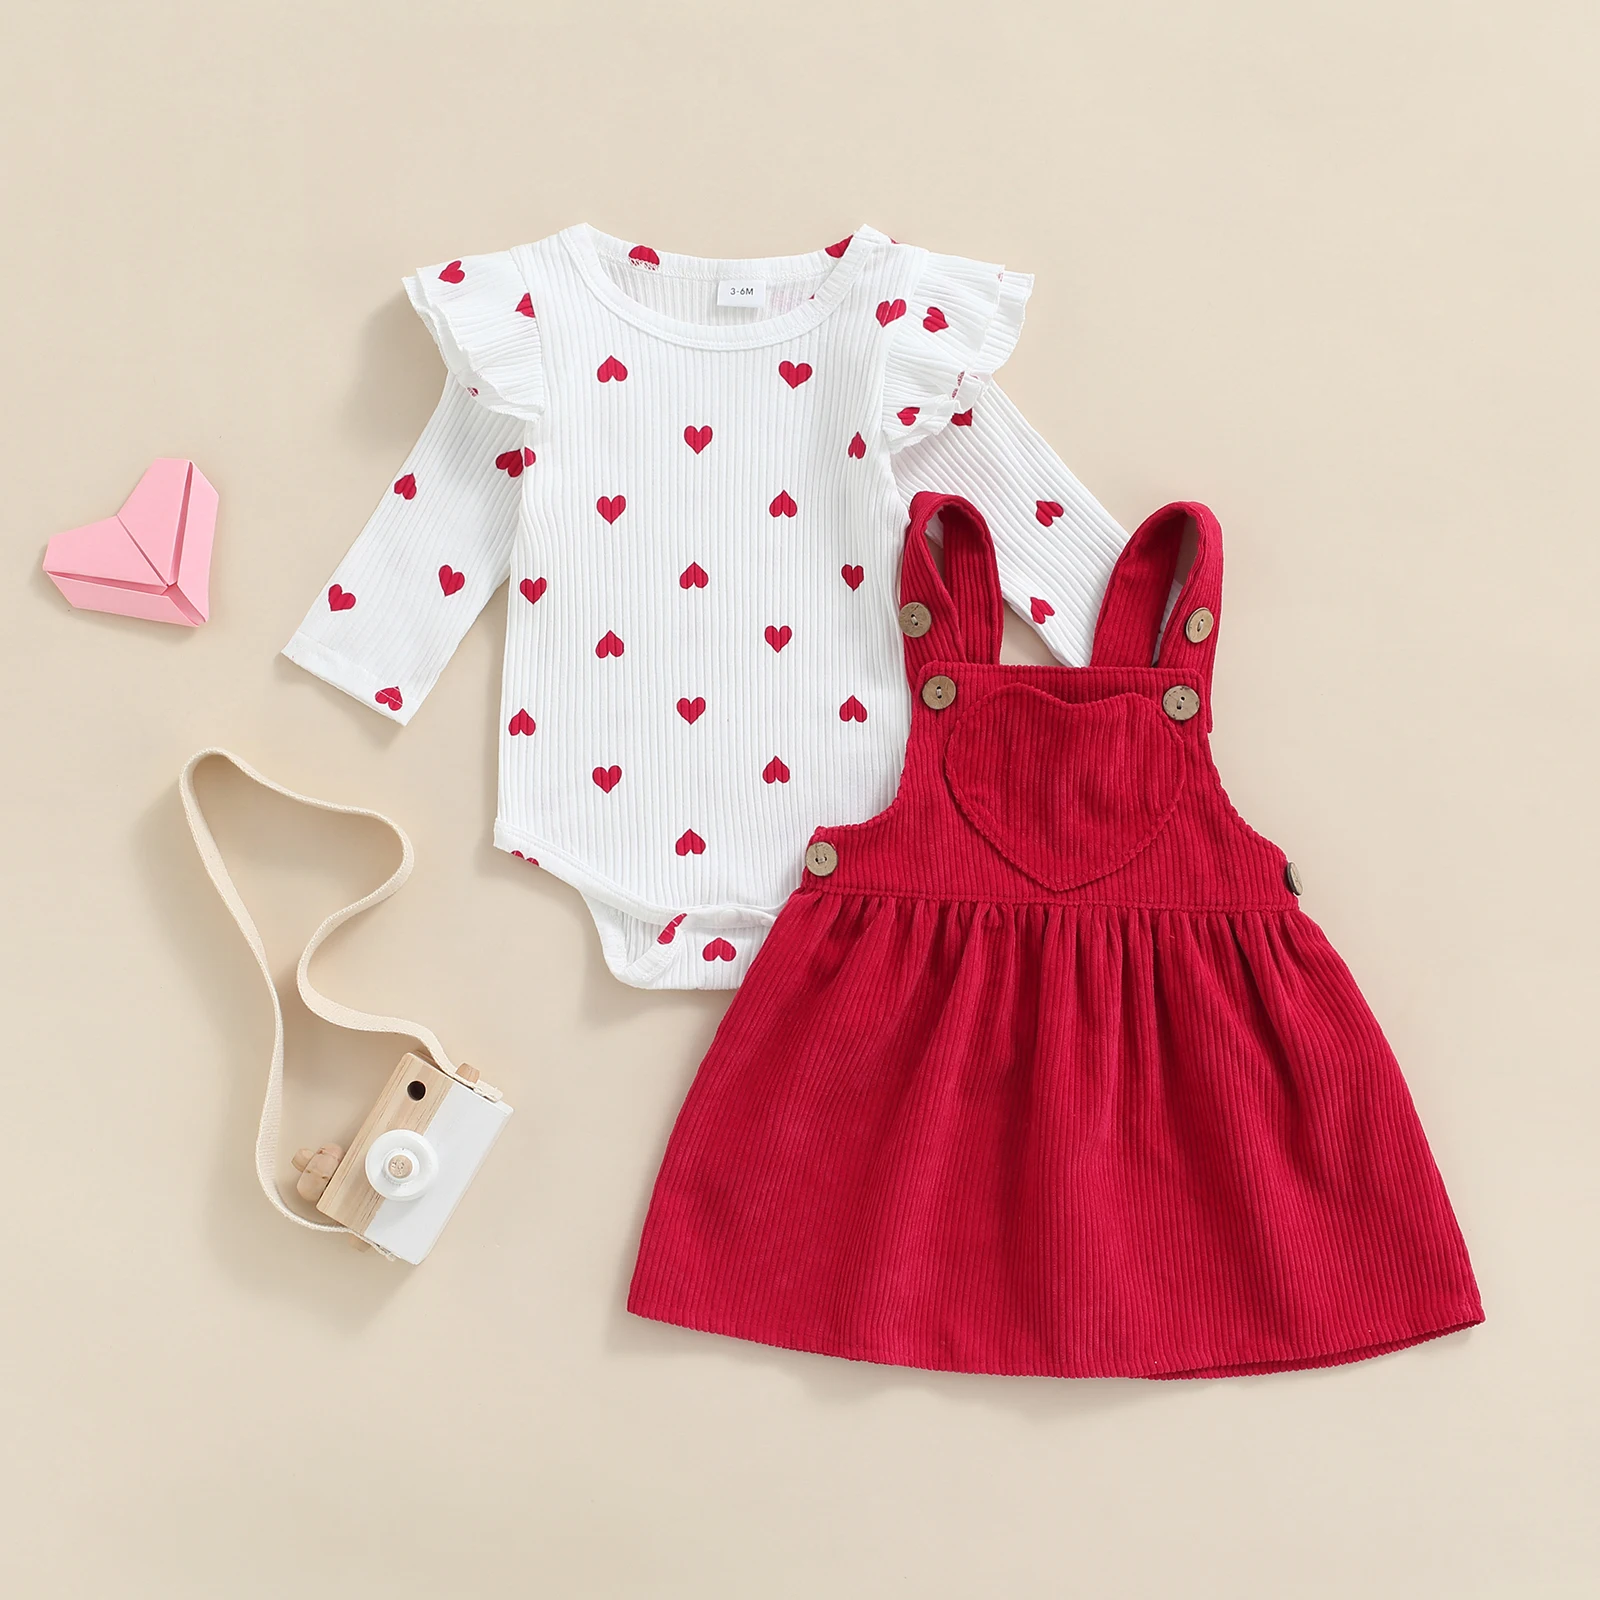 Citgeett Spring Valentine's Day Infant Baby Girls Clothes Sets Heart Print Ruffles Long Sleee Bodysuits+Suspender Skirts Outfit